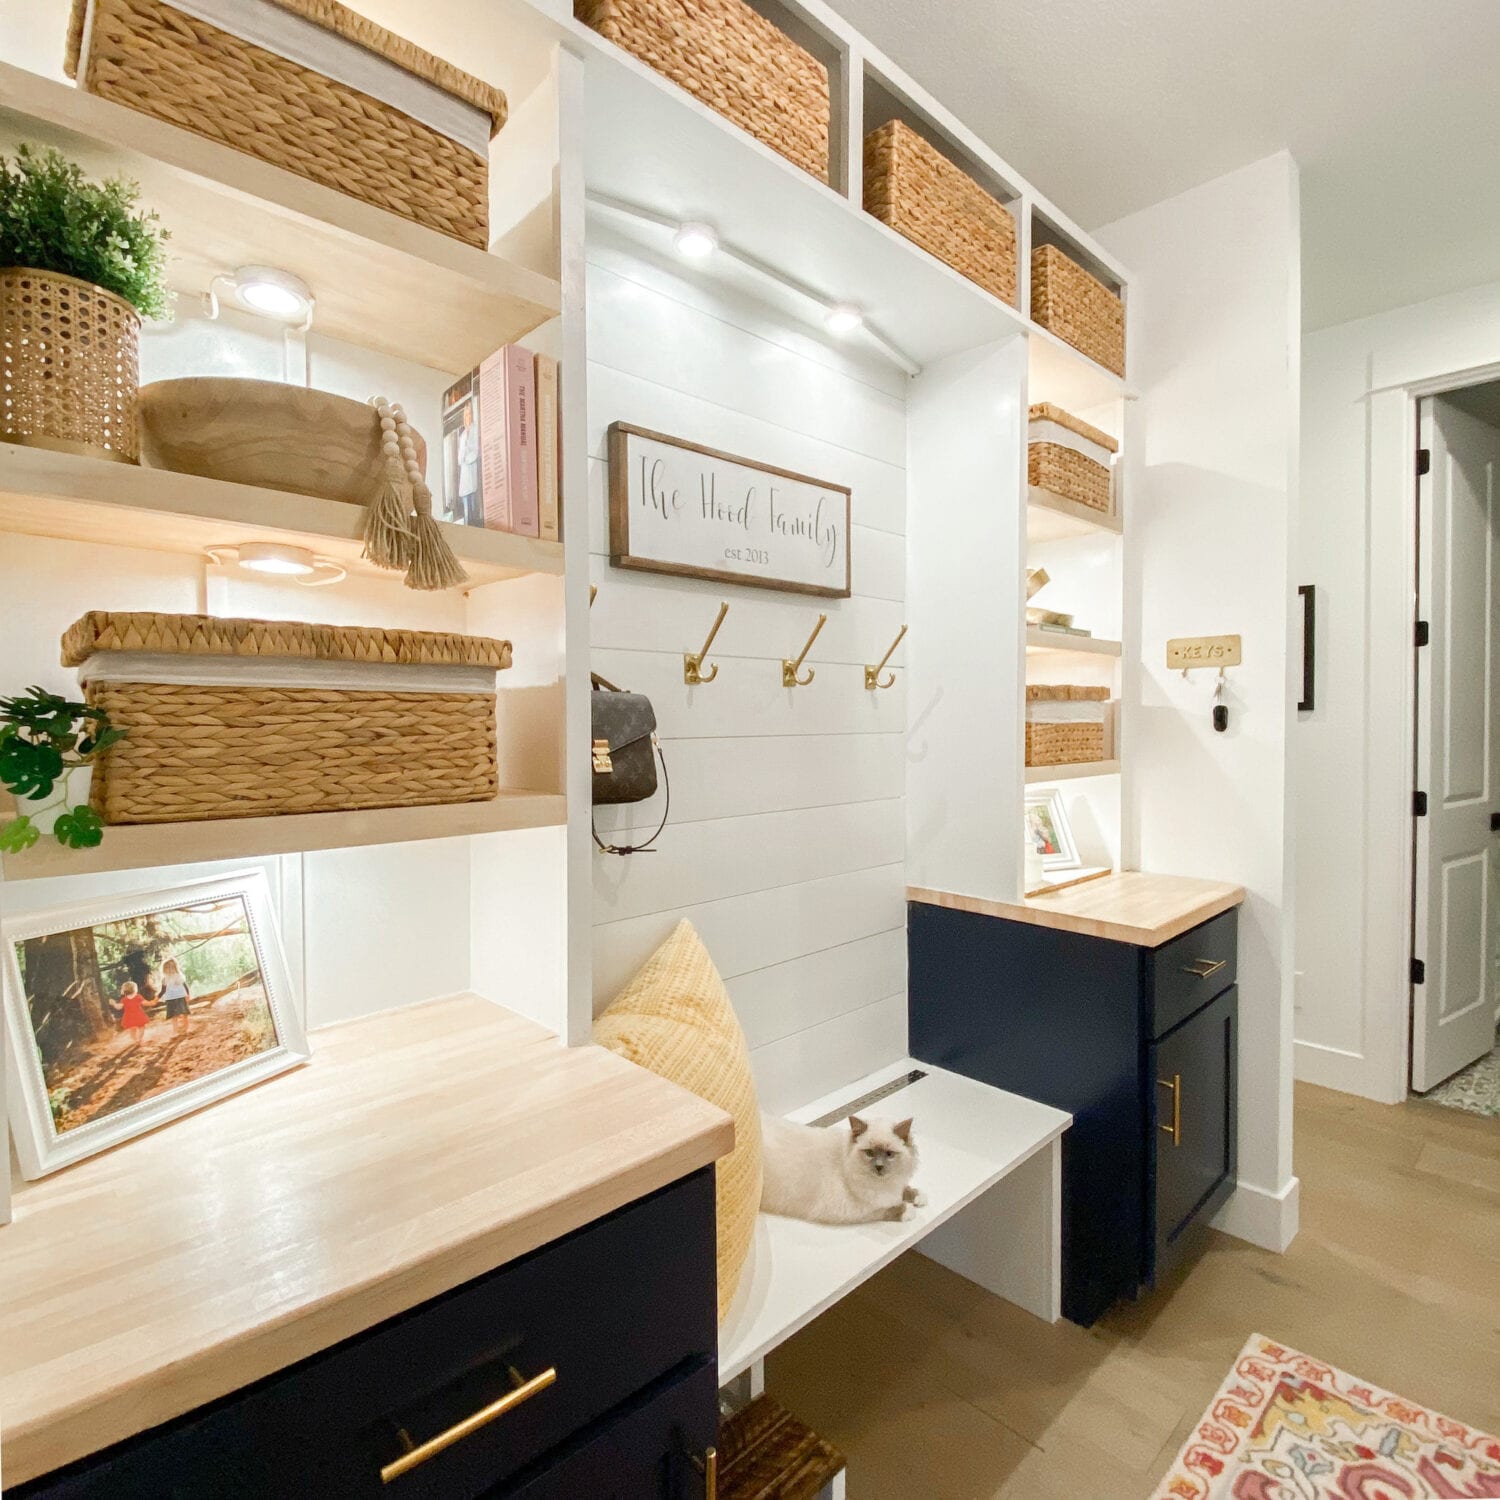 Our Mudroom Design with Storage Solutions